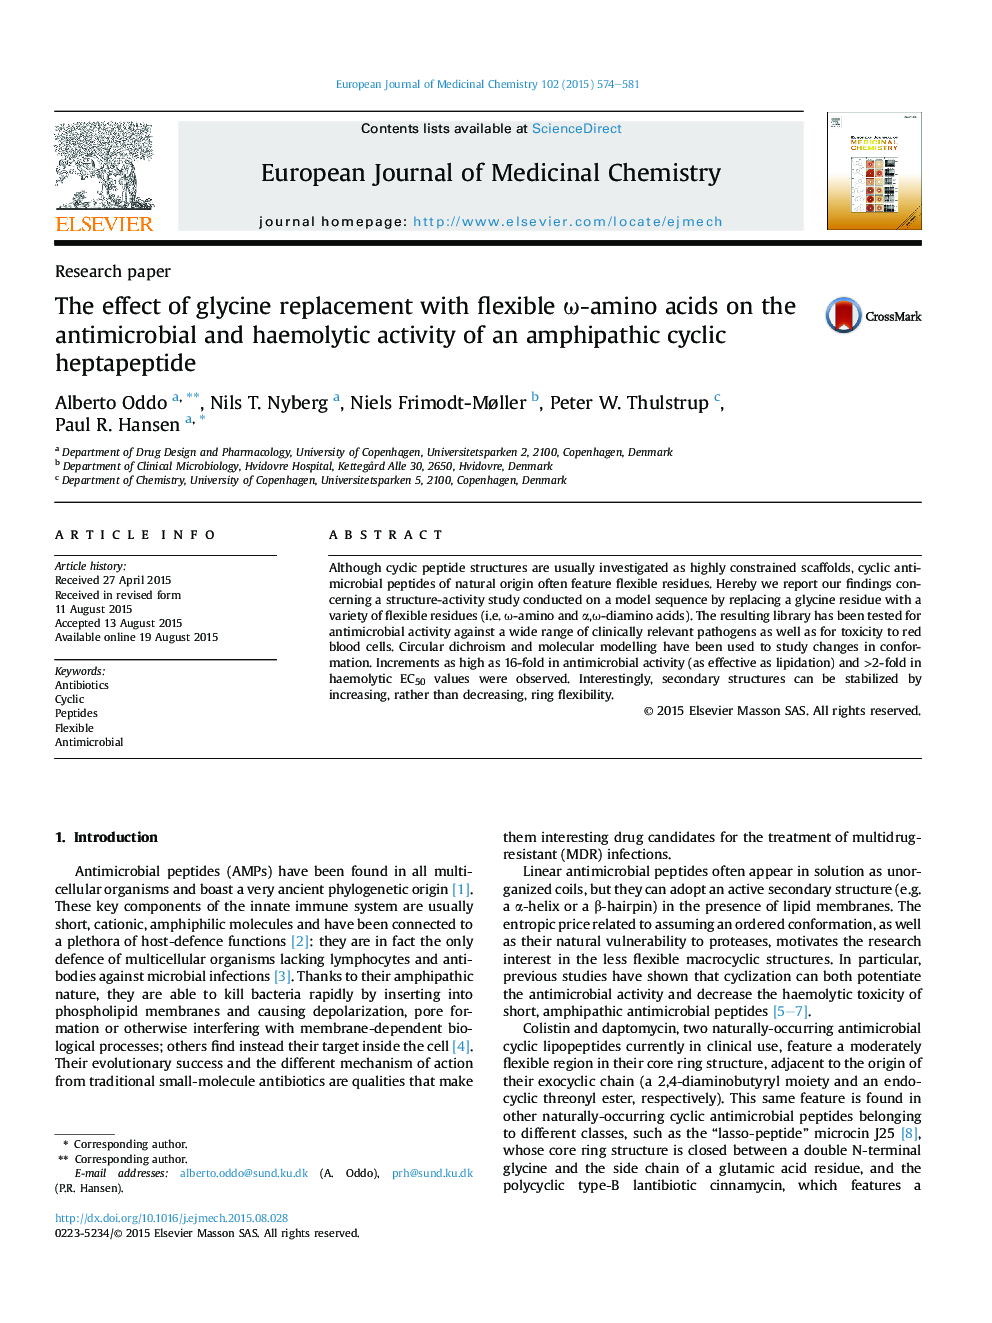 The effect of glycine replacement with flexible ω-amino acids on the antimicrobial and haemolytic activity of an amphipathic cyclic heptapeptide